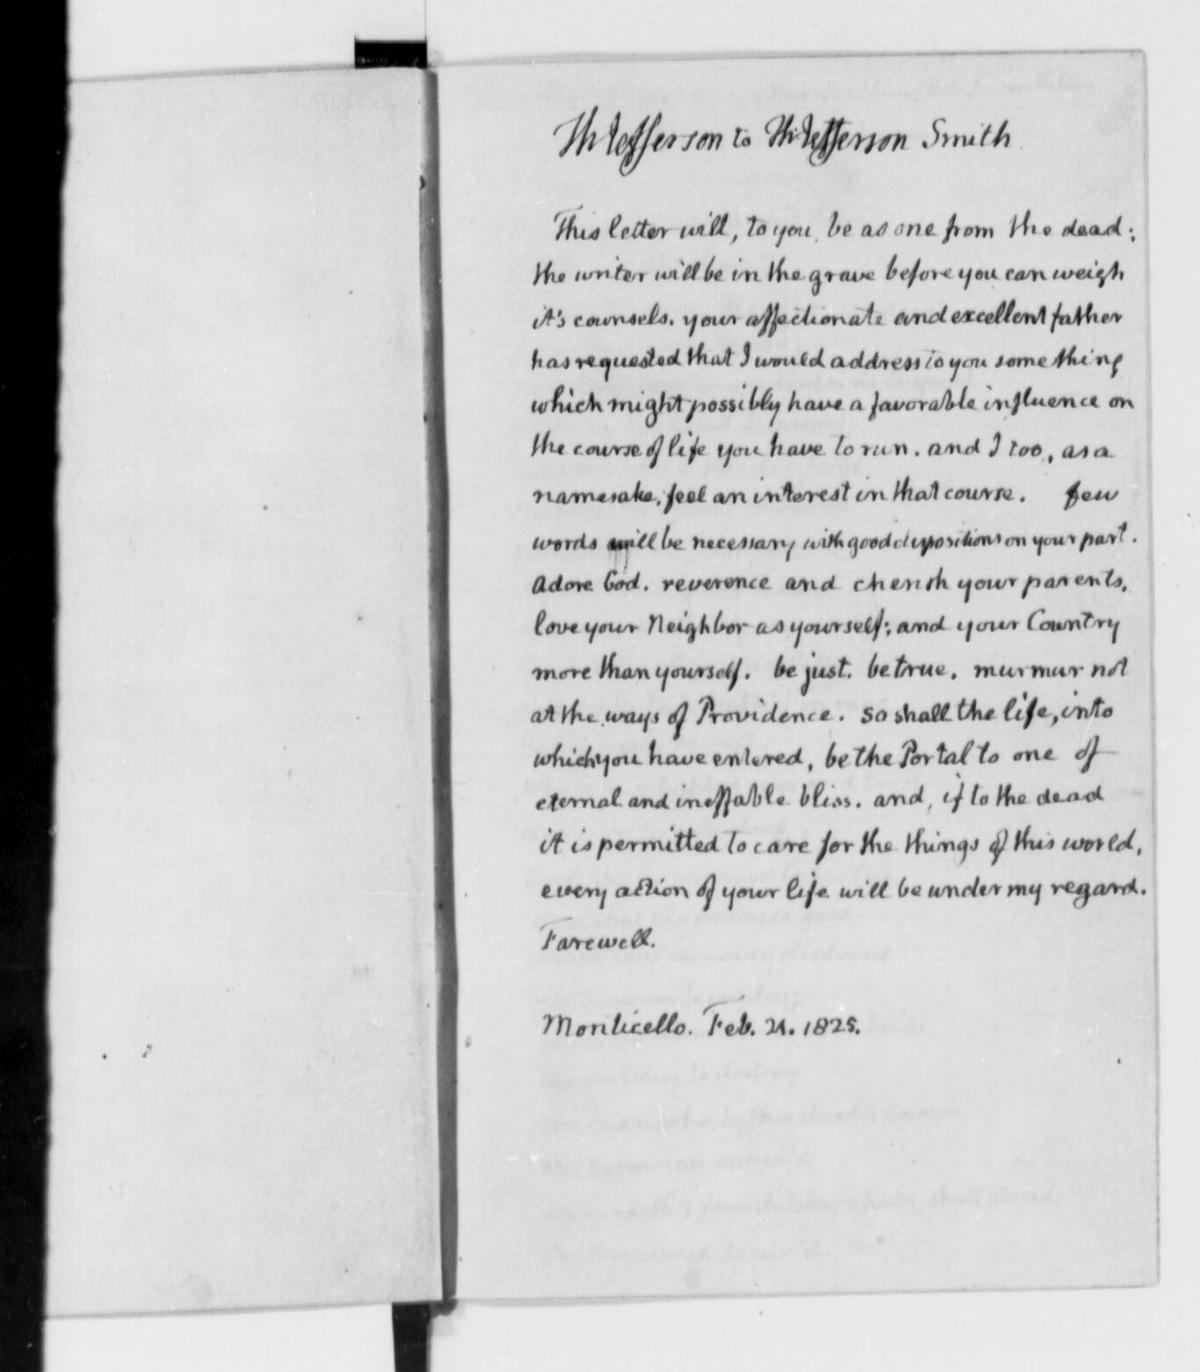 Thomas Jefferson inscribed flyleaves in Cicero's De Re Publica, published in 1823, with advice to Thomas Jefferson Smith, the son of Samuel Harrison Smith, an old friend and political ally. (Library of Congress, Manuscript Division)